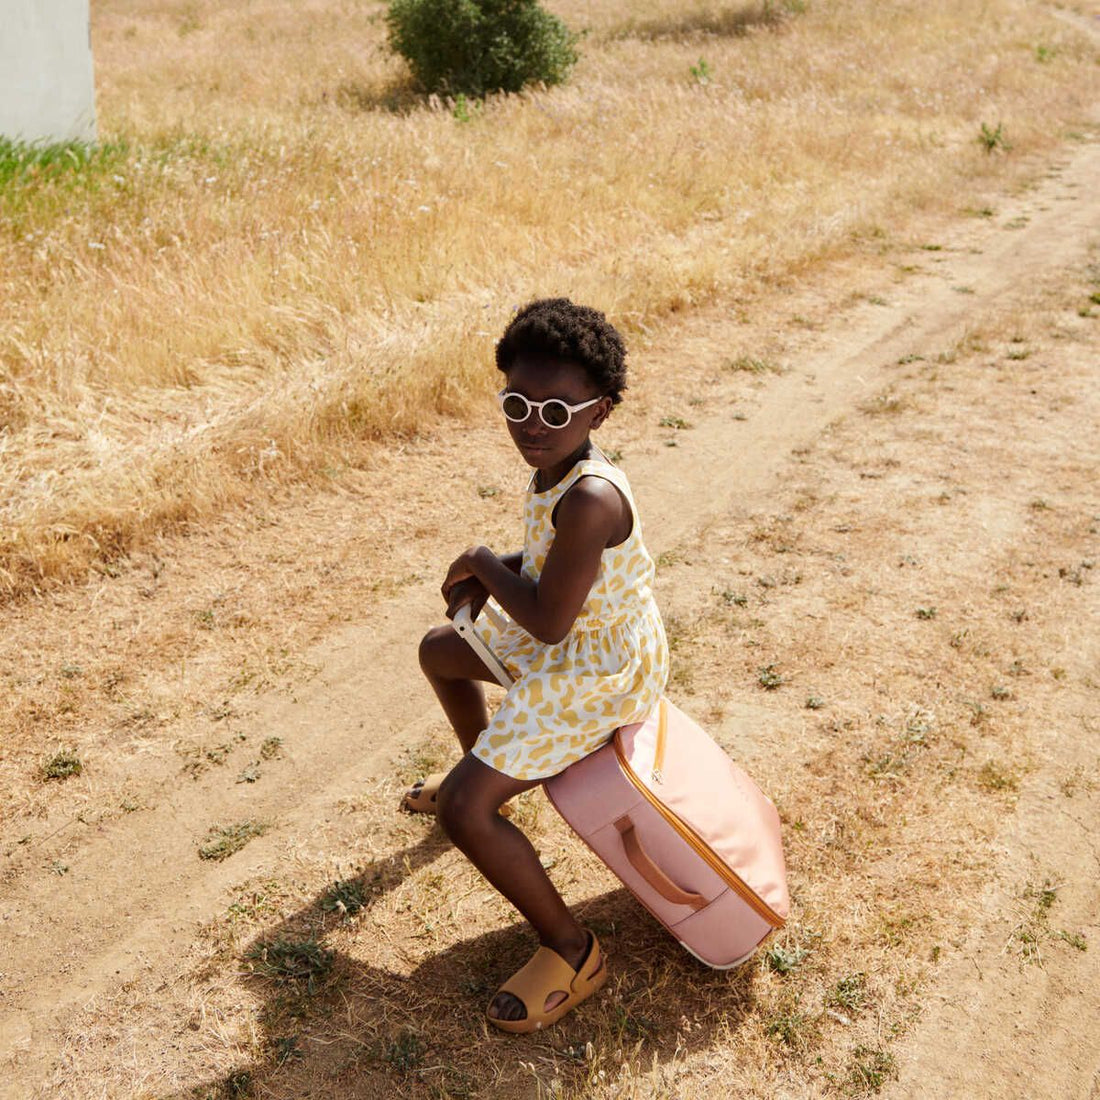 A girl wearing sunglasses and a dress is seating on a pink suitcase